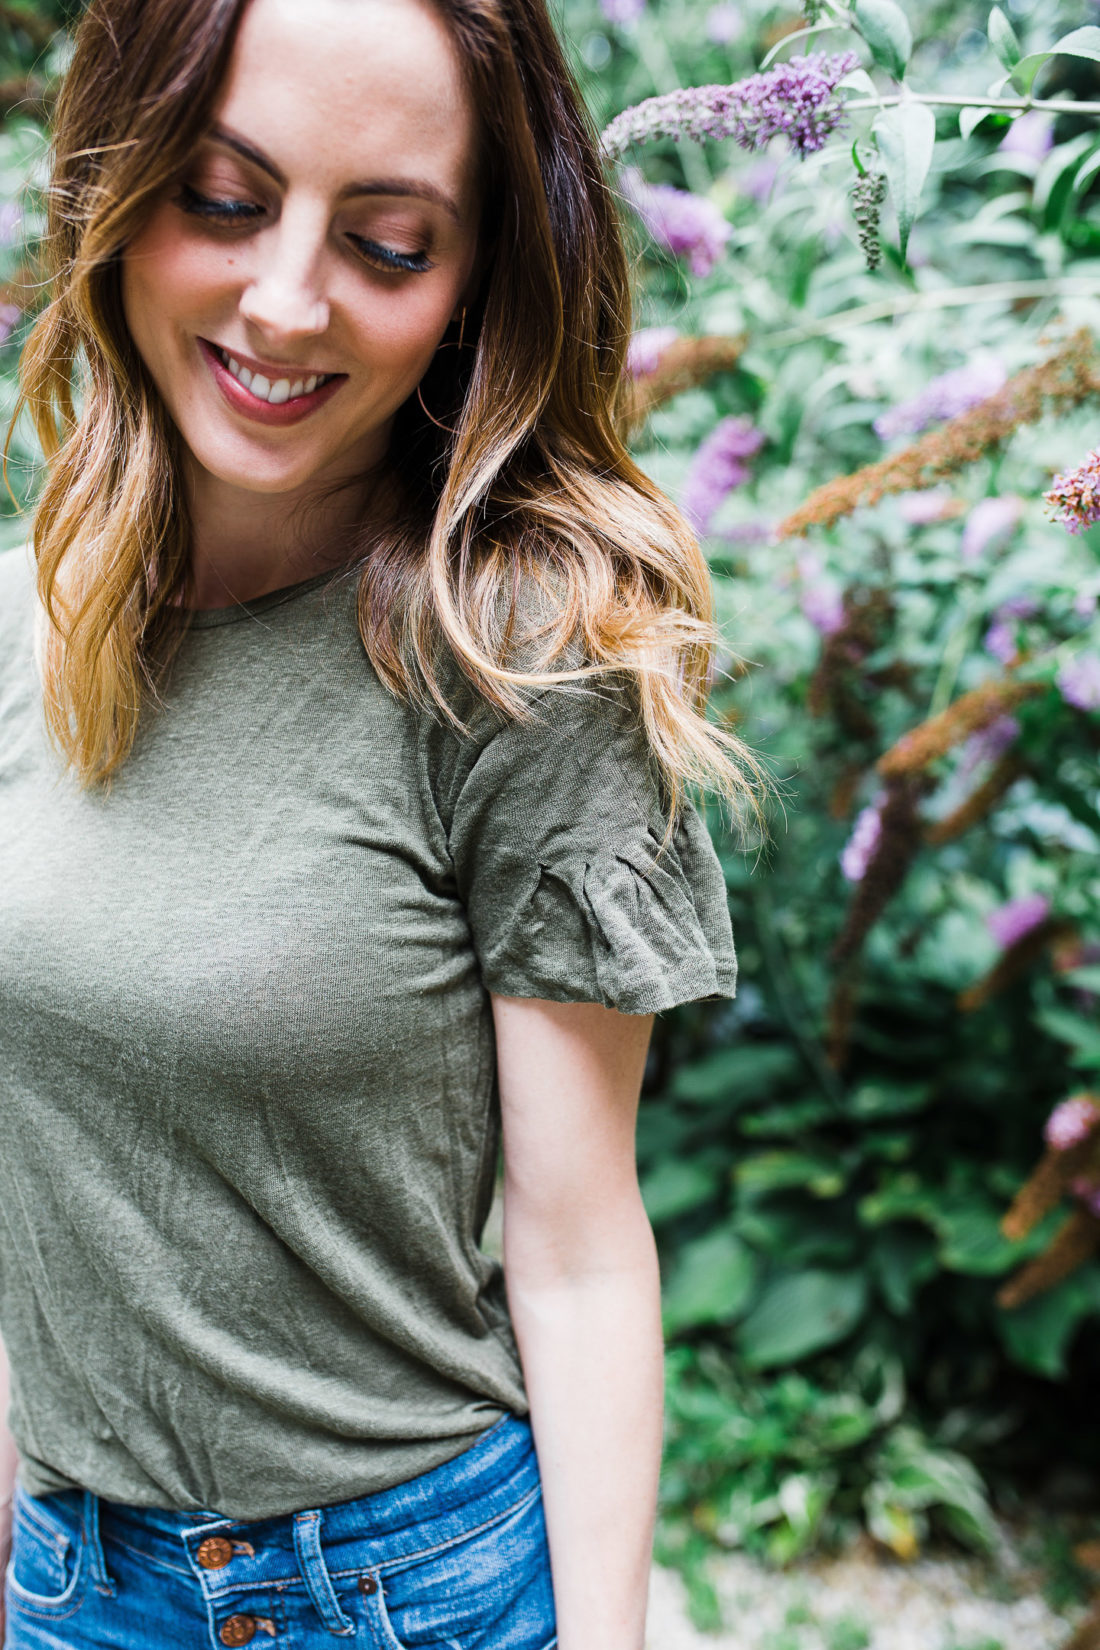 Eva Amurri Martino wears an army green flutter sleeve linen Tshirt in the courtyard of her Connecticut home